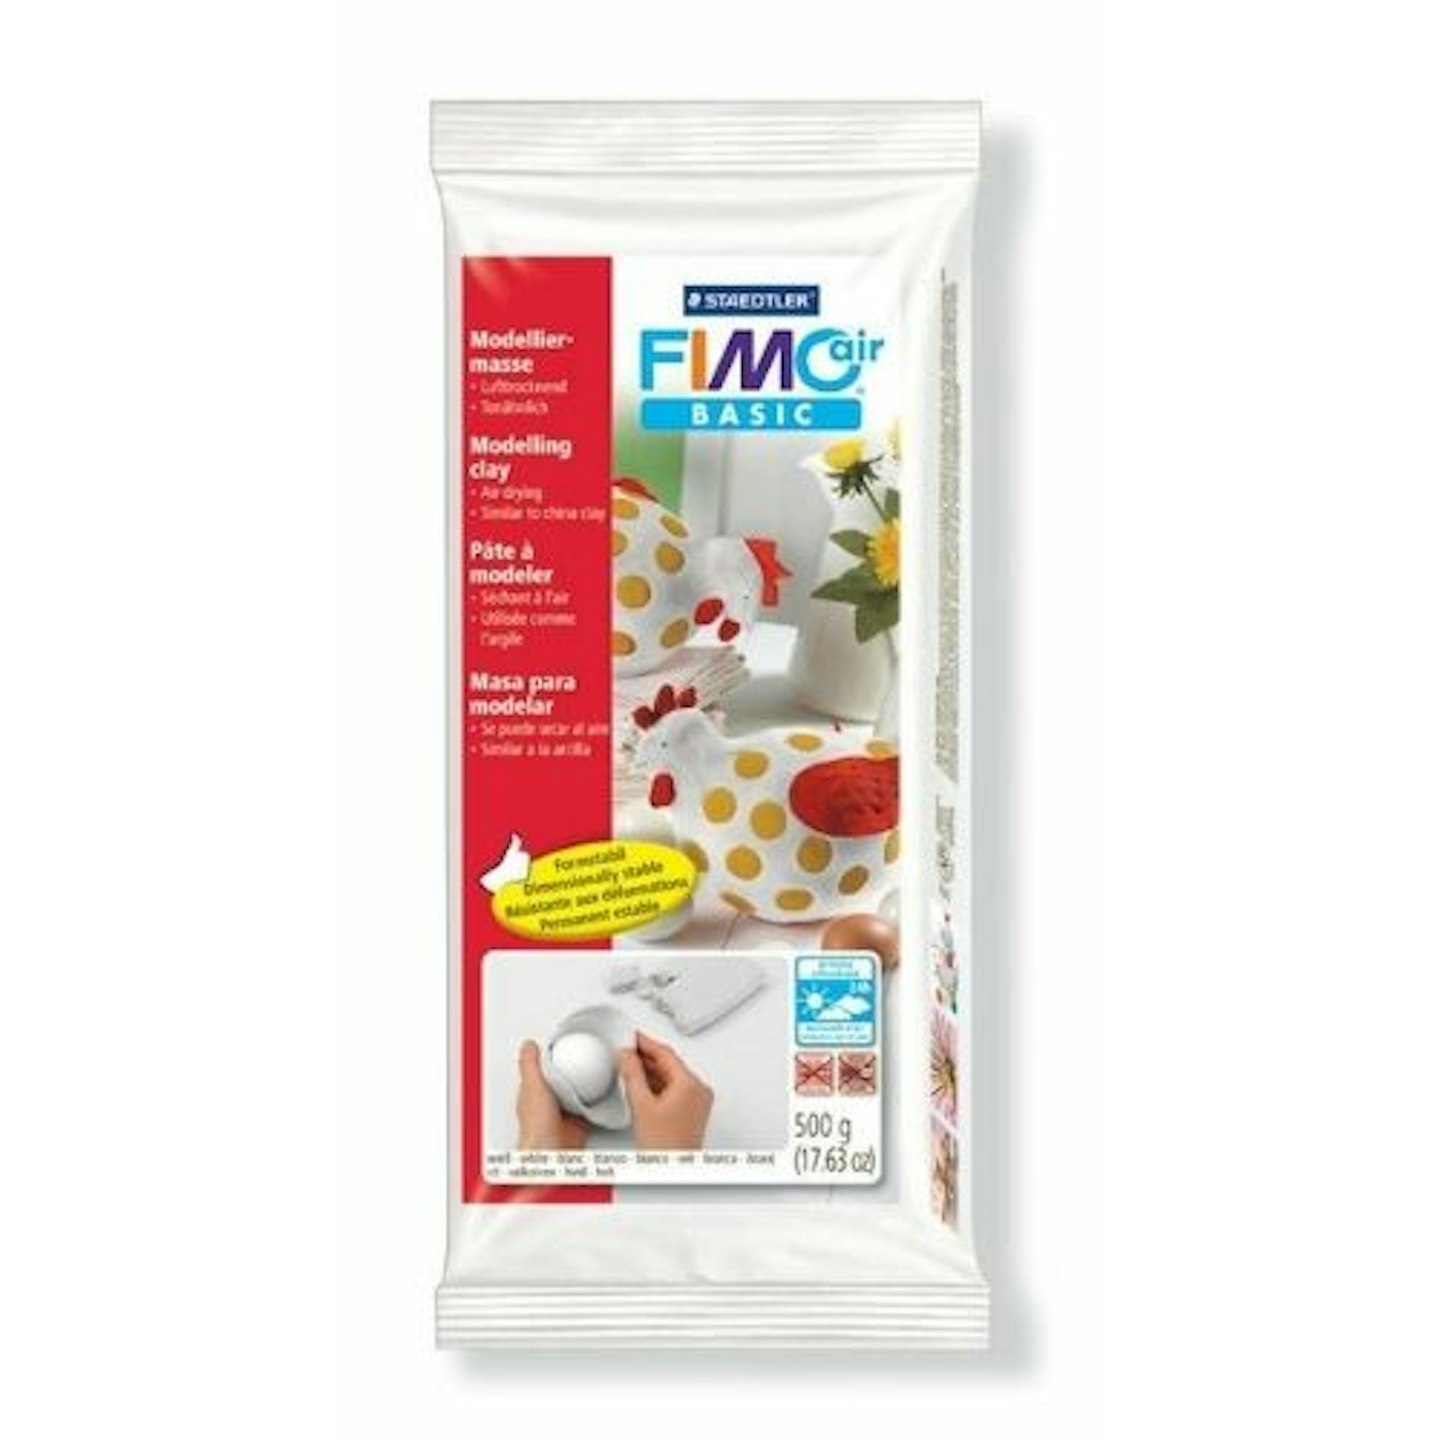 STAEDTLER Fimo Air Basic Air Drying Modelling Clay 1 kg - White